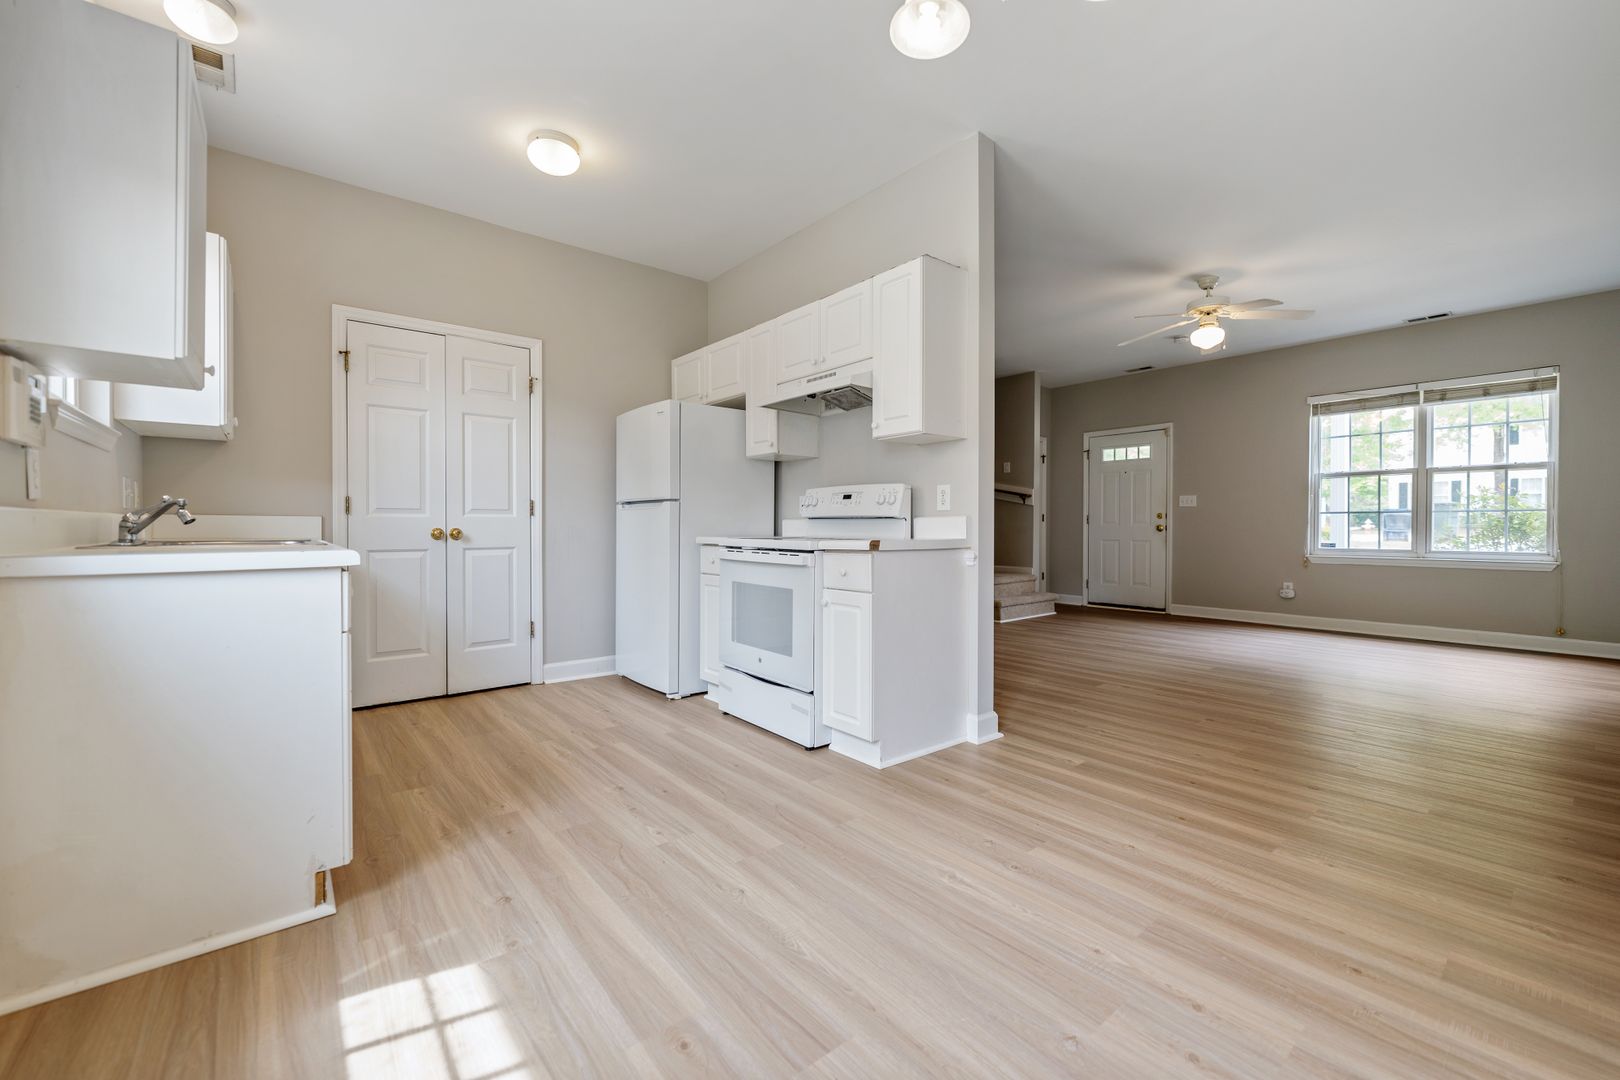 Available Now! Renovated 3 bedroom 2.5 bath End Unit in NE Raleigh